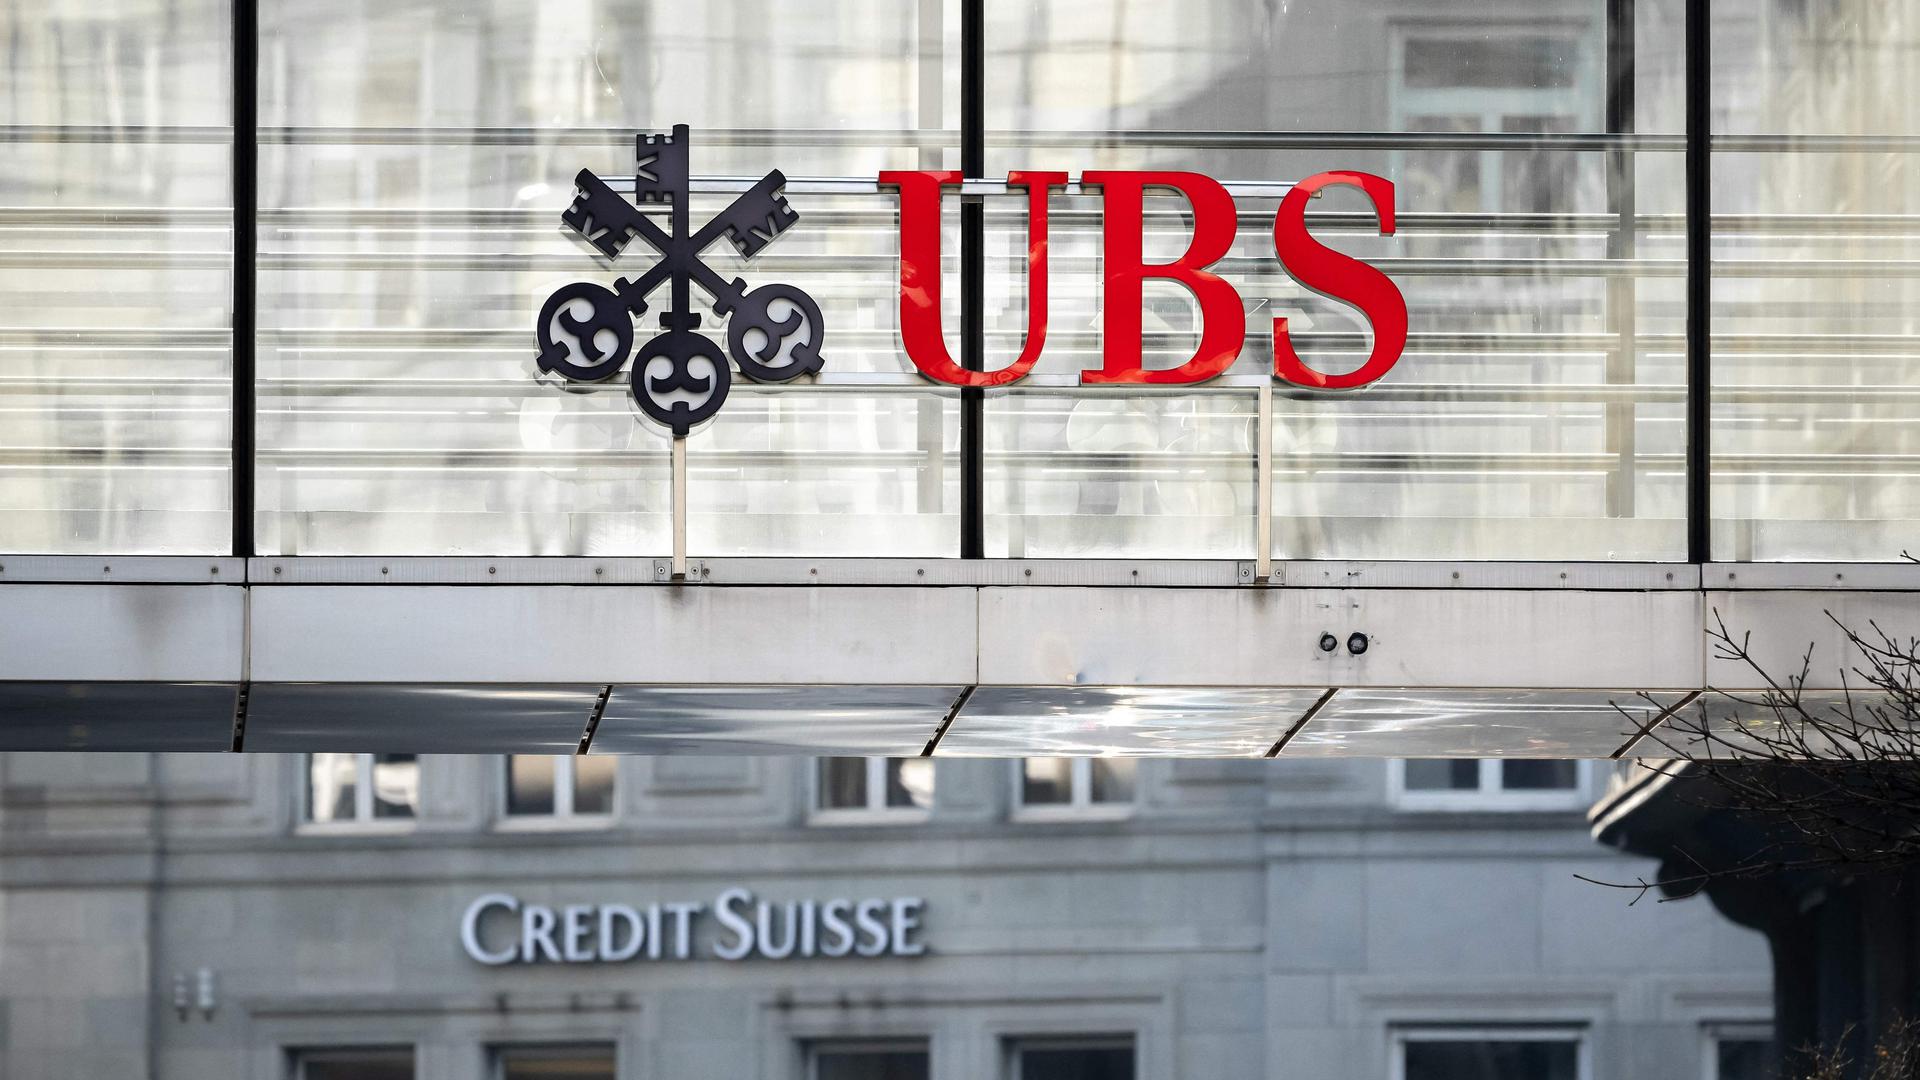 UBS has agreed to take over Credit Suisse